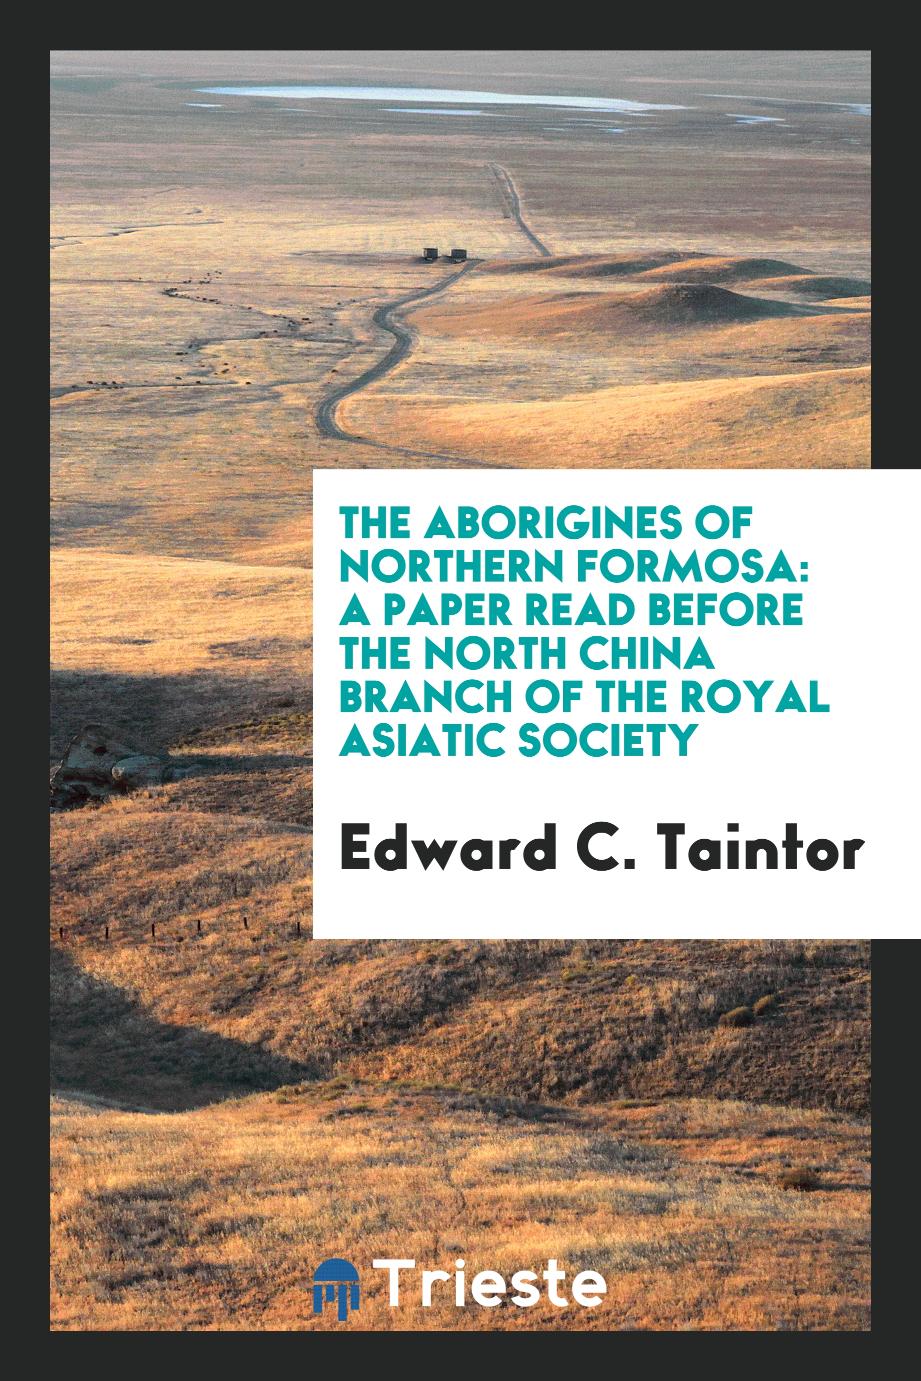 The Aborigines of Northern Formosa: A Paper Read Before the North China Branch of the Royal asiatic society